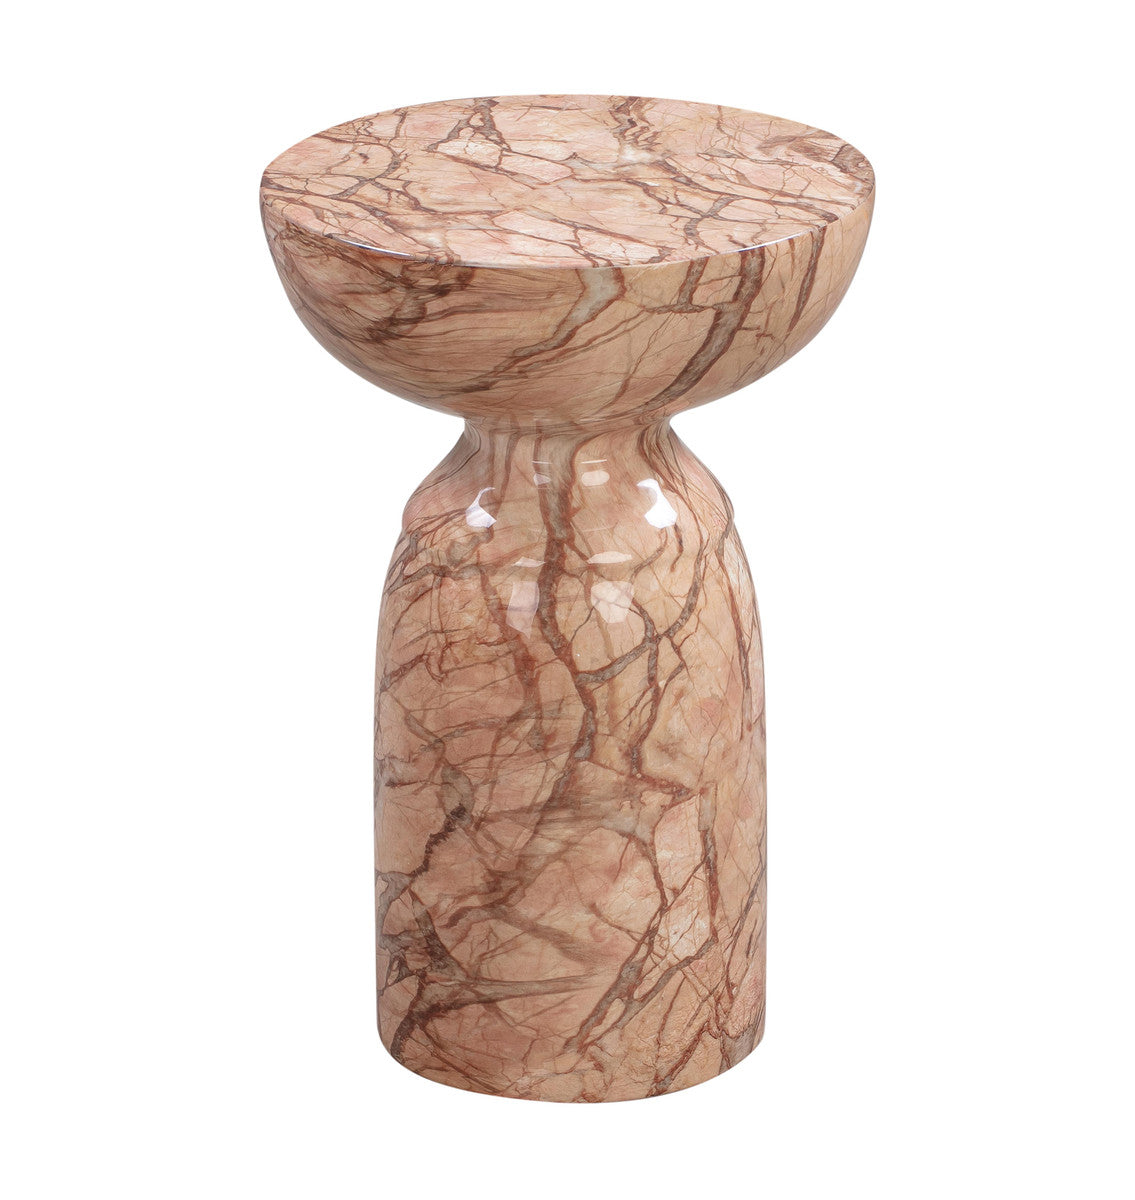 Load image into Gallery viewer, Rue Black Marble Side Table Rue Sunset MarbleSide Table TOV Furniture  Rue Sunset Marble   Four Hands, Burke Decor, Mid Century Modern Furniture, Old Bones Furniture Company, Old Bones Co, Modern Mid Century, Designer Furniture, https://www.oldbonesco.com/
